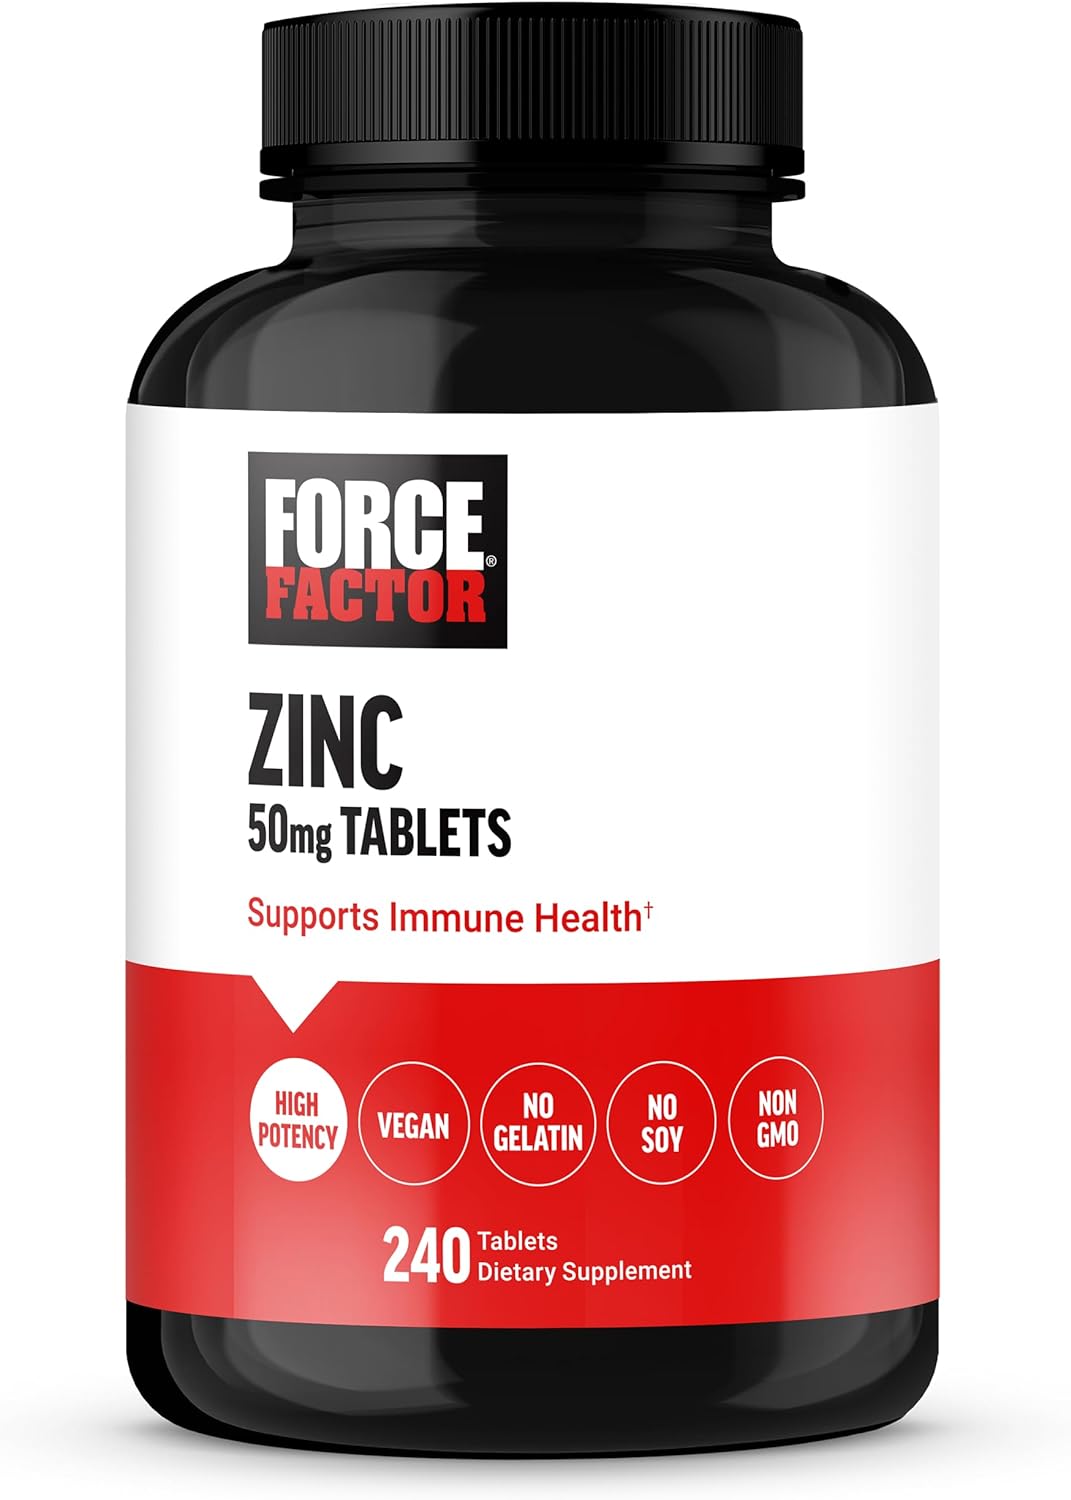 Force Factor Zinc 50mg, Zinc Supplements with Zinc Oxide Powder, Zinc Gluconate, and Zinc Citrate for Immune Support and Immune Health, High-Potency, Vegan, Gelatin Free, Non-GMO, 240 Tablets